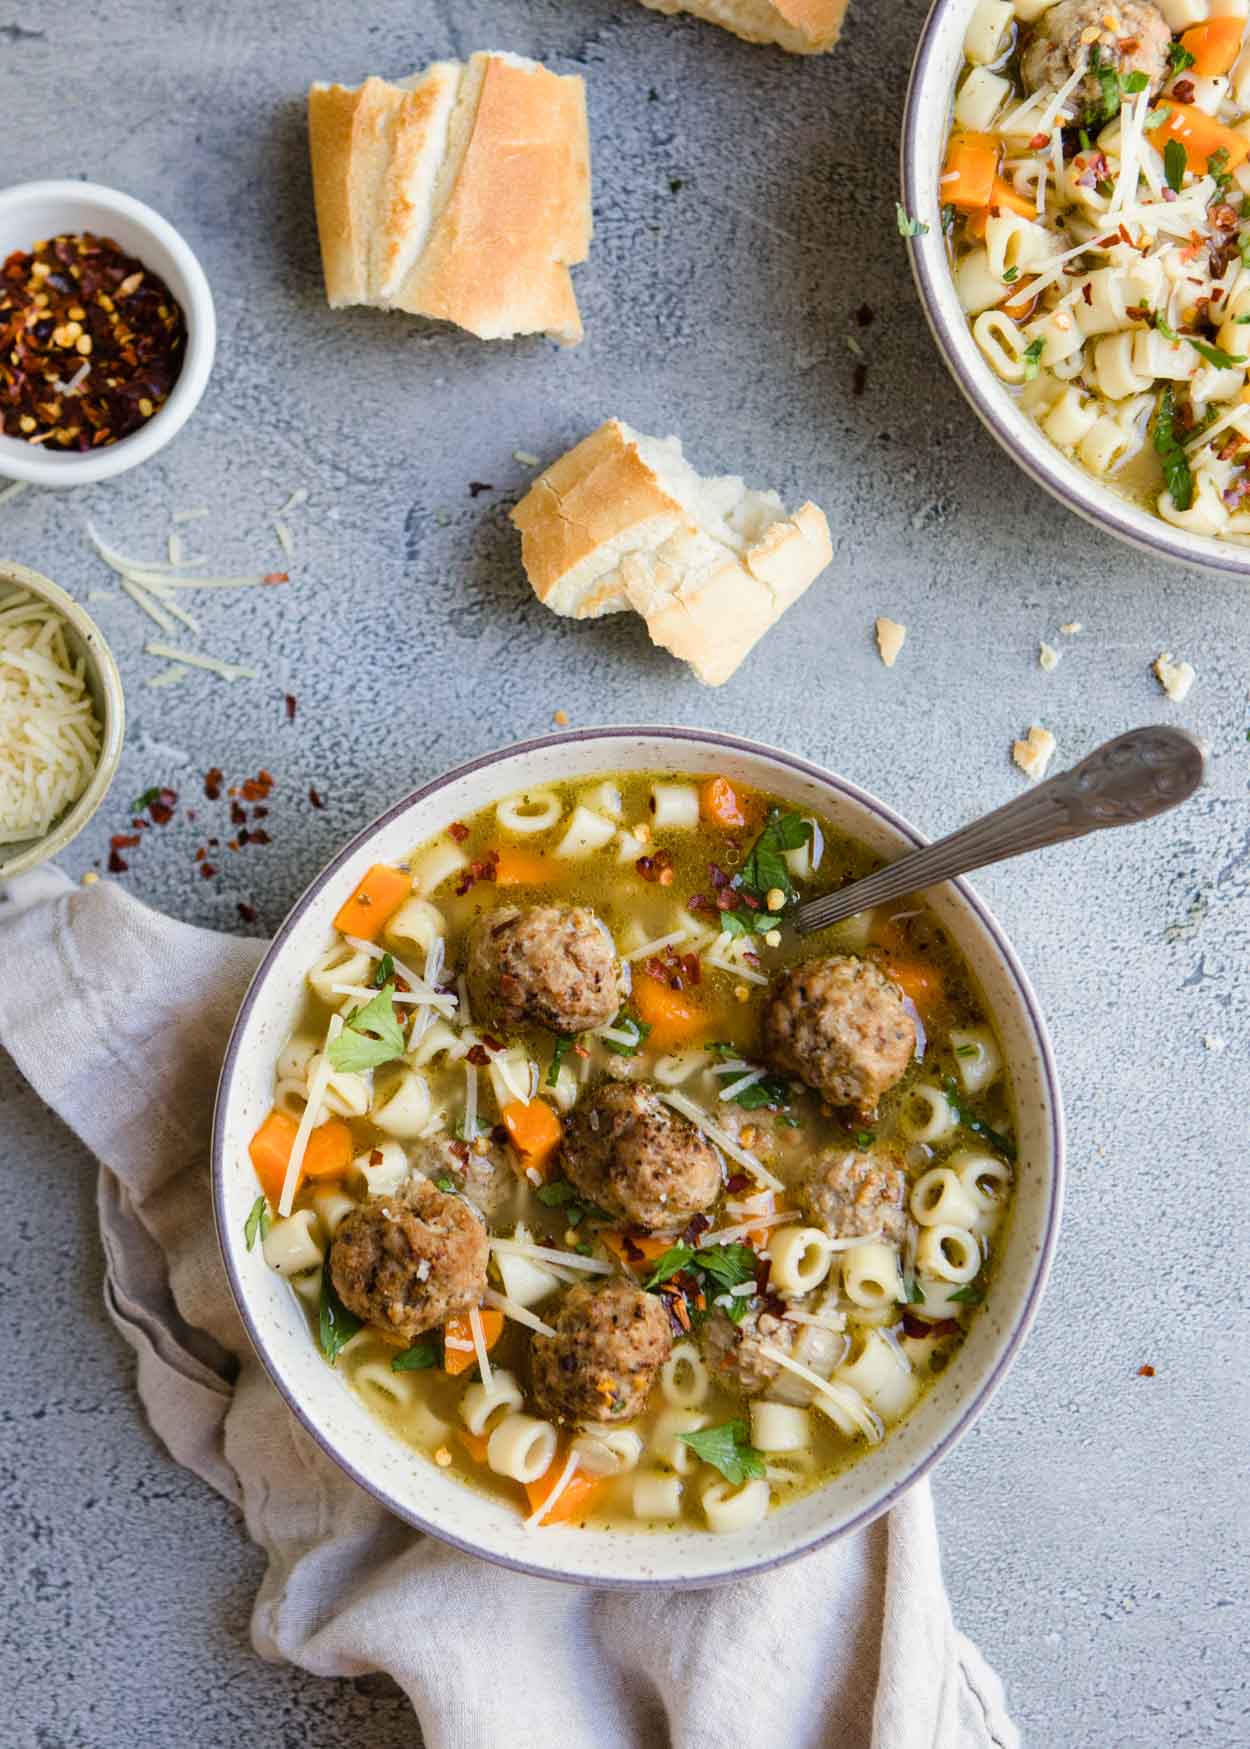 Round bowl filled with pasta and meatball soup and chili flakes, Parmesan cheese and crusty bread